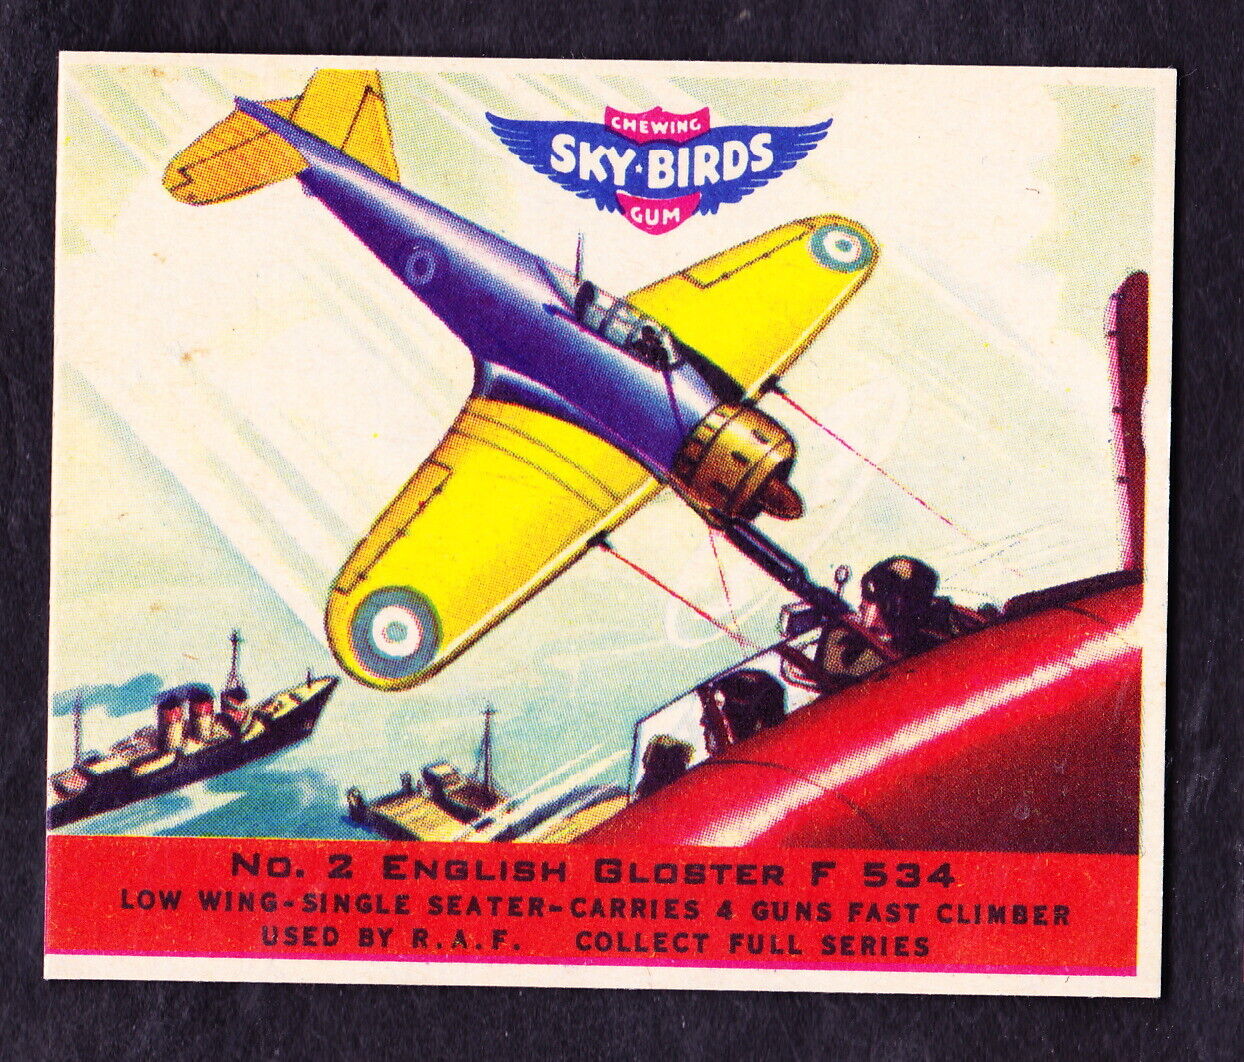 1941 GOUDEY SKY BIRDS #2 ENGLISH GLOSTER F 534 REAL NICE